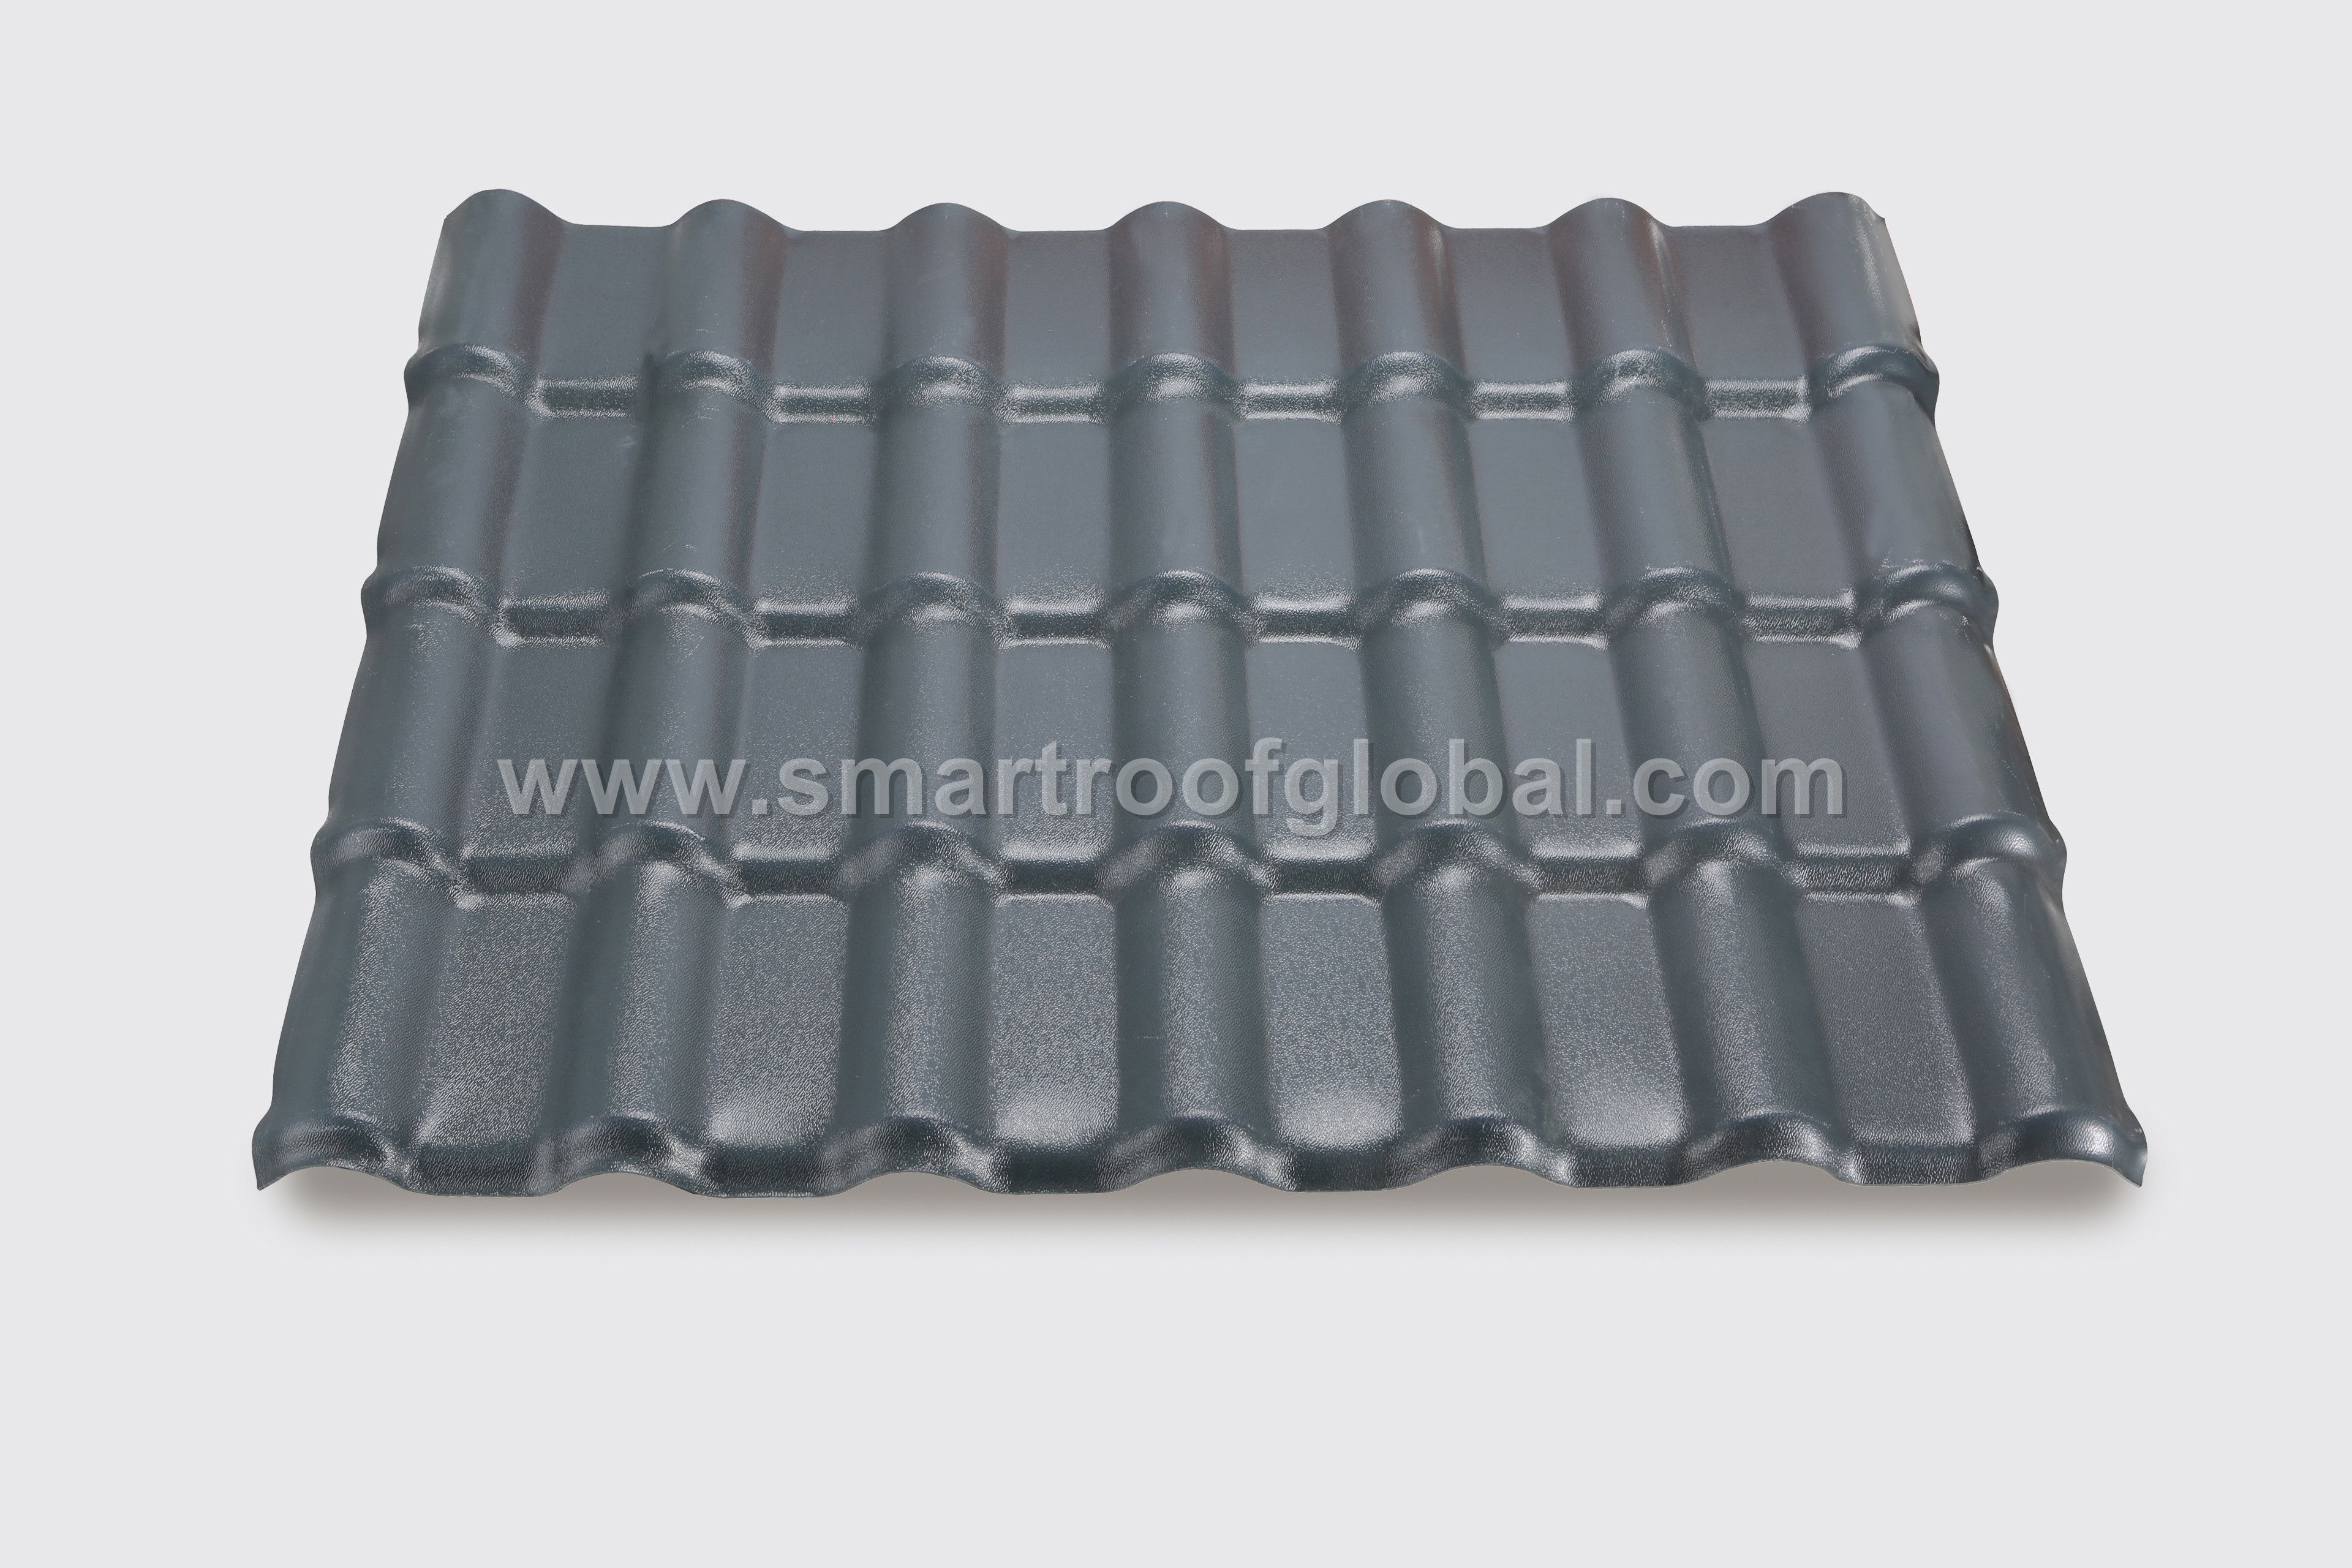 Competitive Price for Corrugated Steel Roof Plate - Pvc Resin Roofing Tile – Smartroof